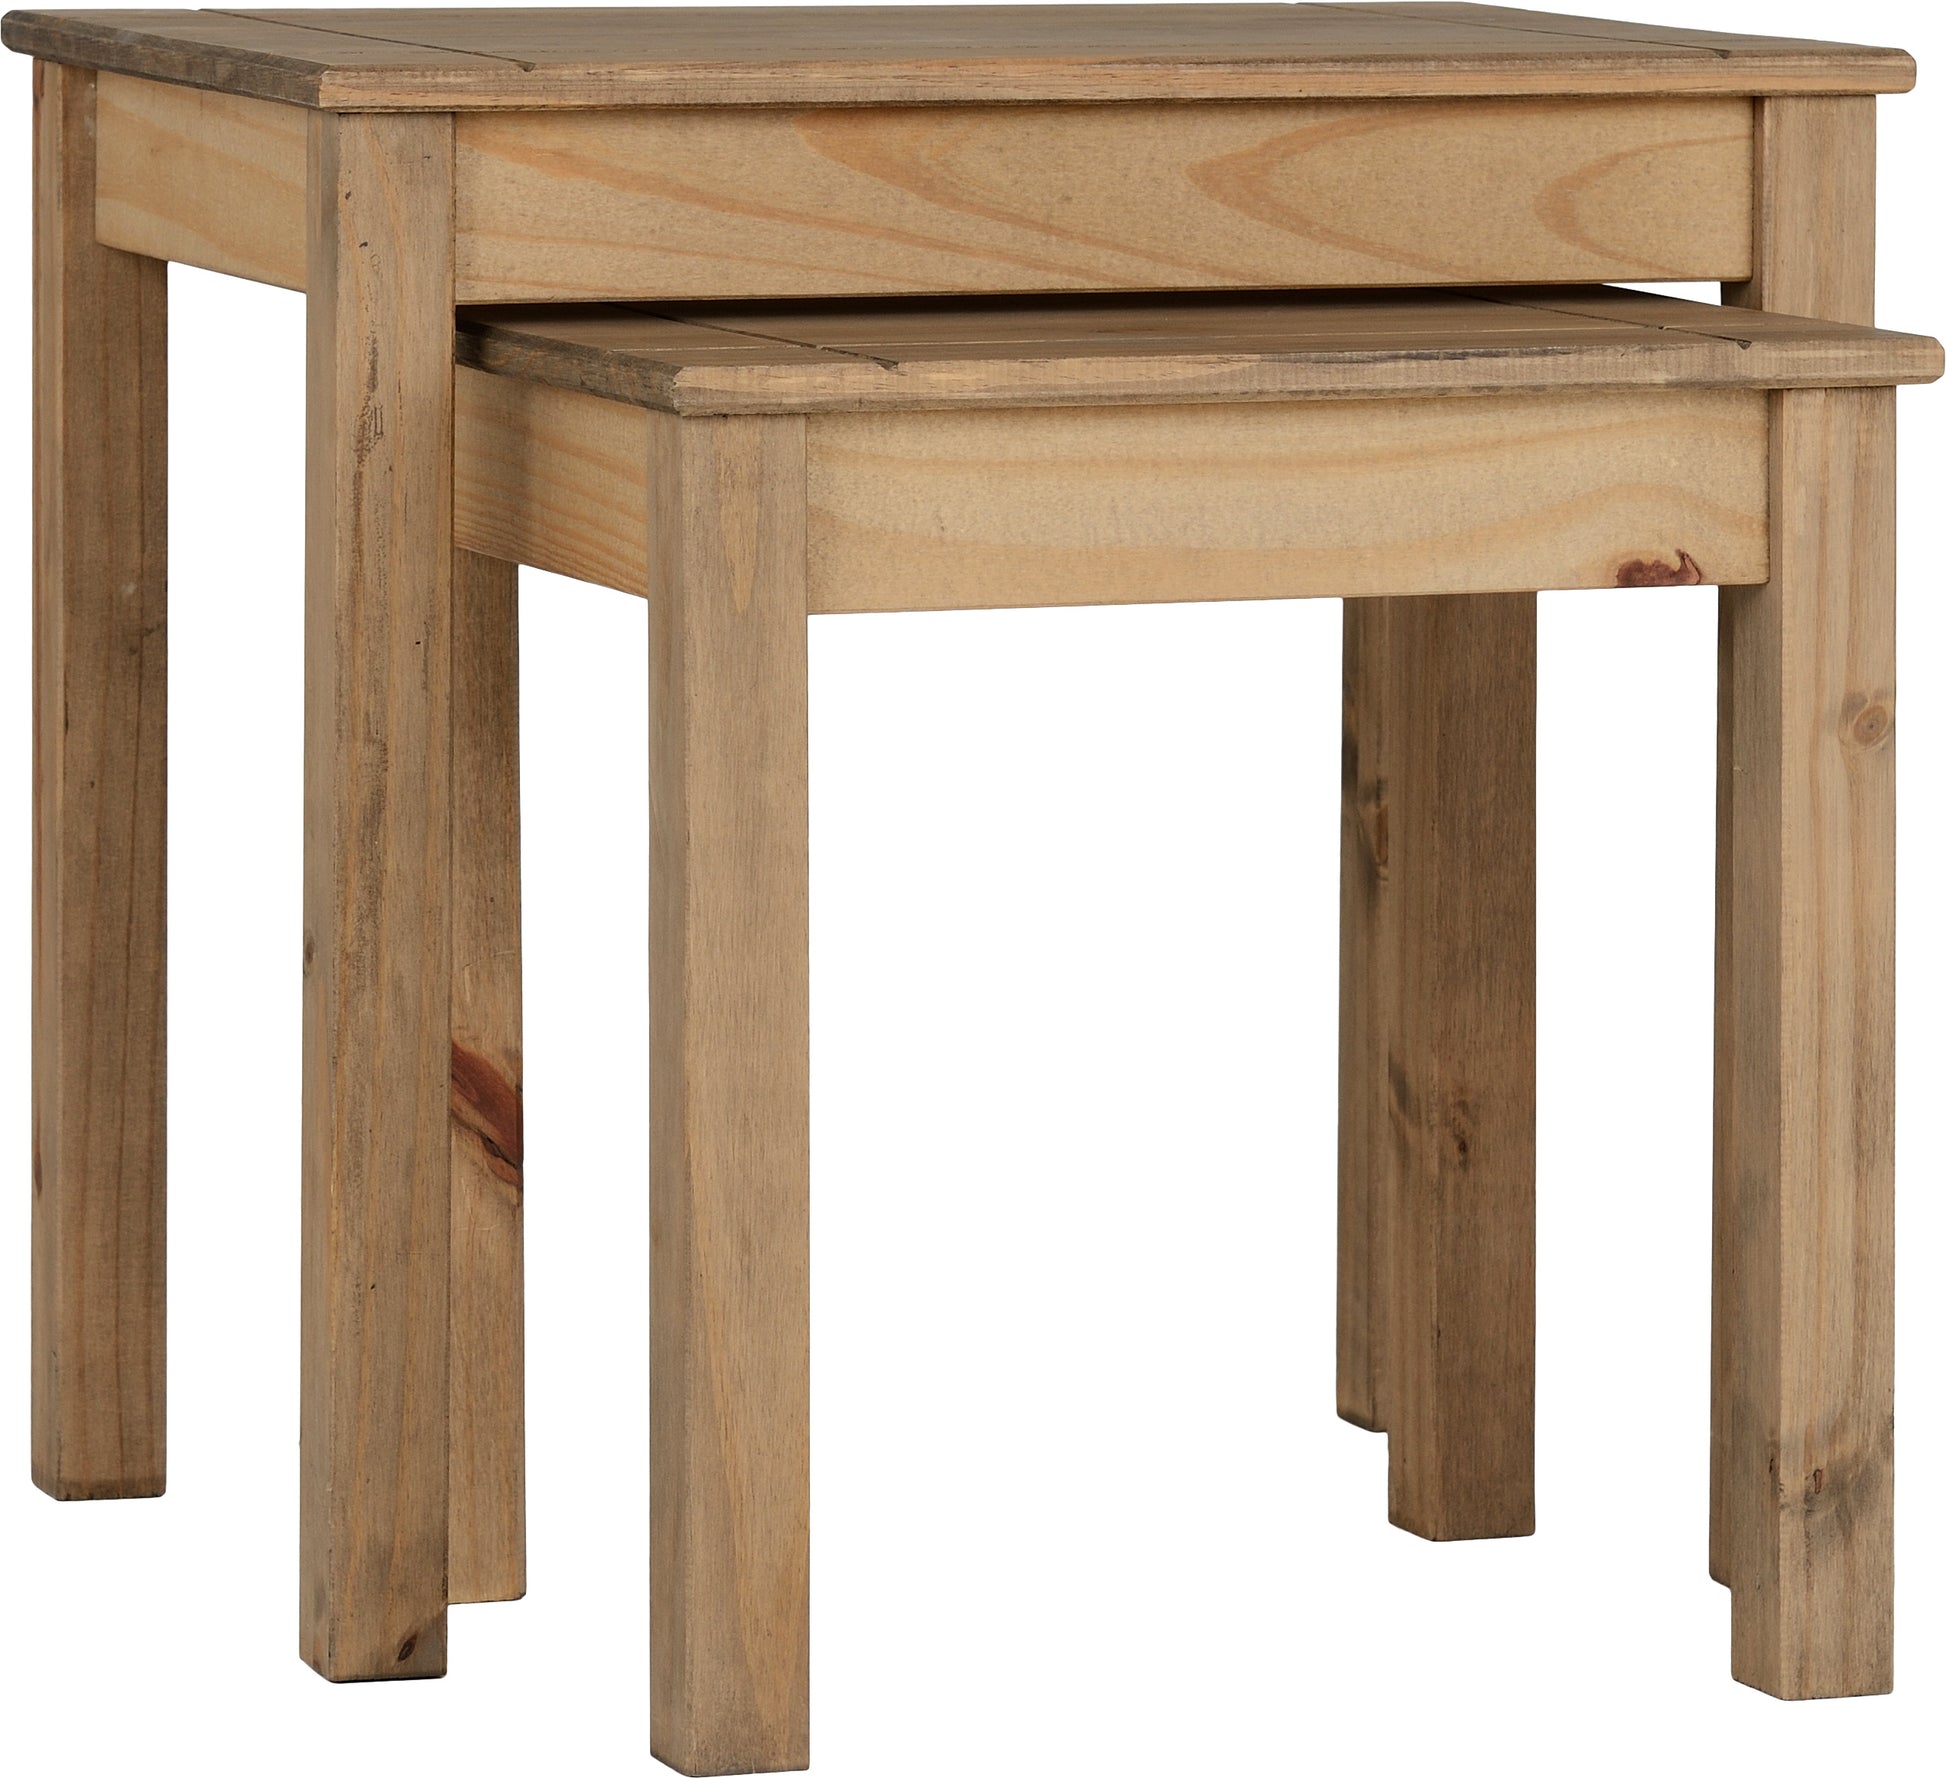 PANAMA-NEST-OF-2-TABLES-NATURAL-WAX-2019-03-300-303-014.jpg